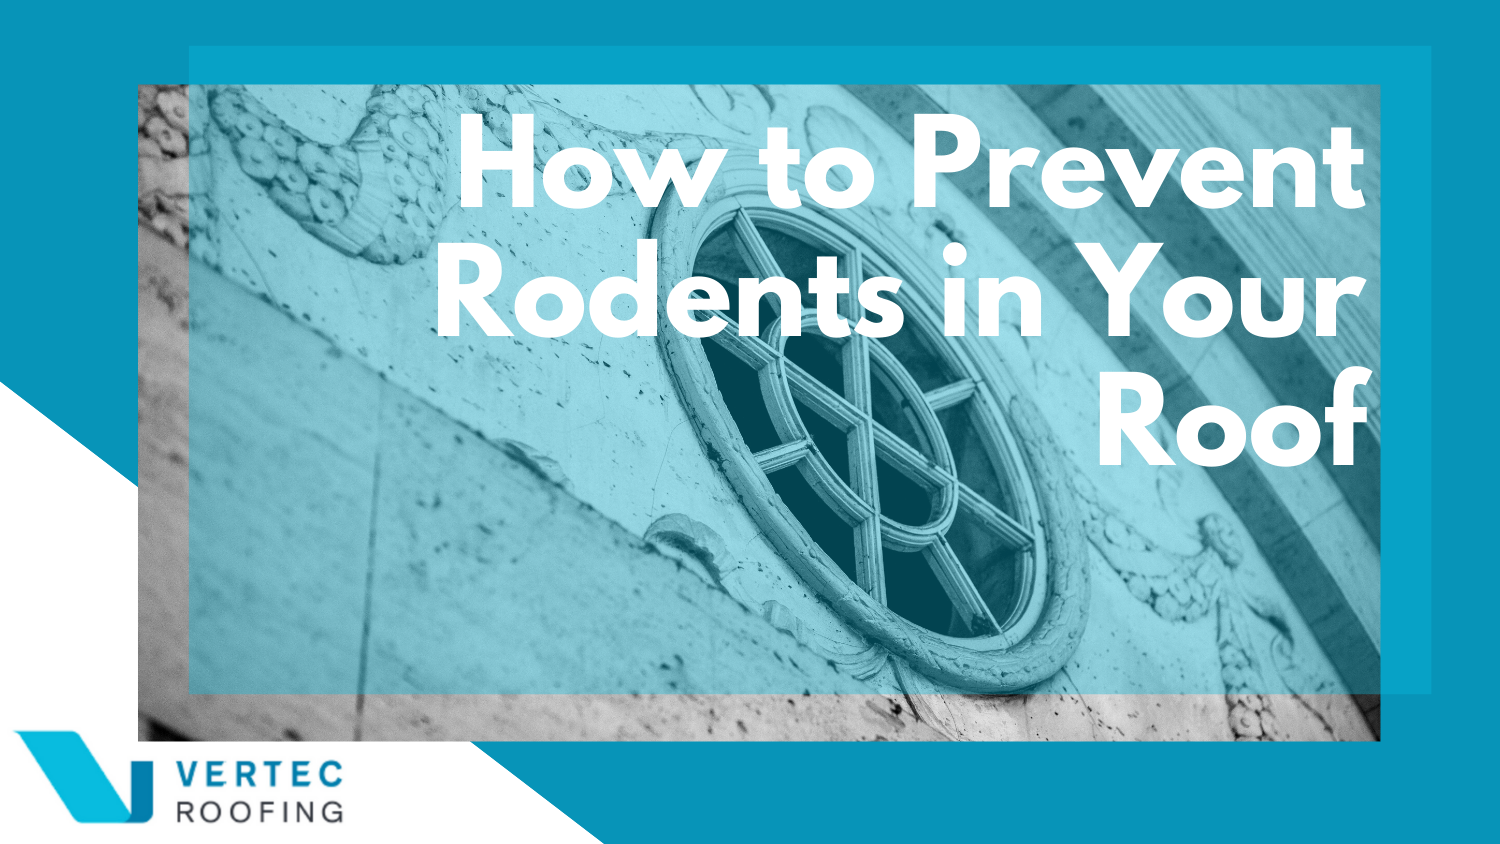 How to Prevent Rodents in Your Roof Cover Image